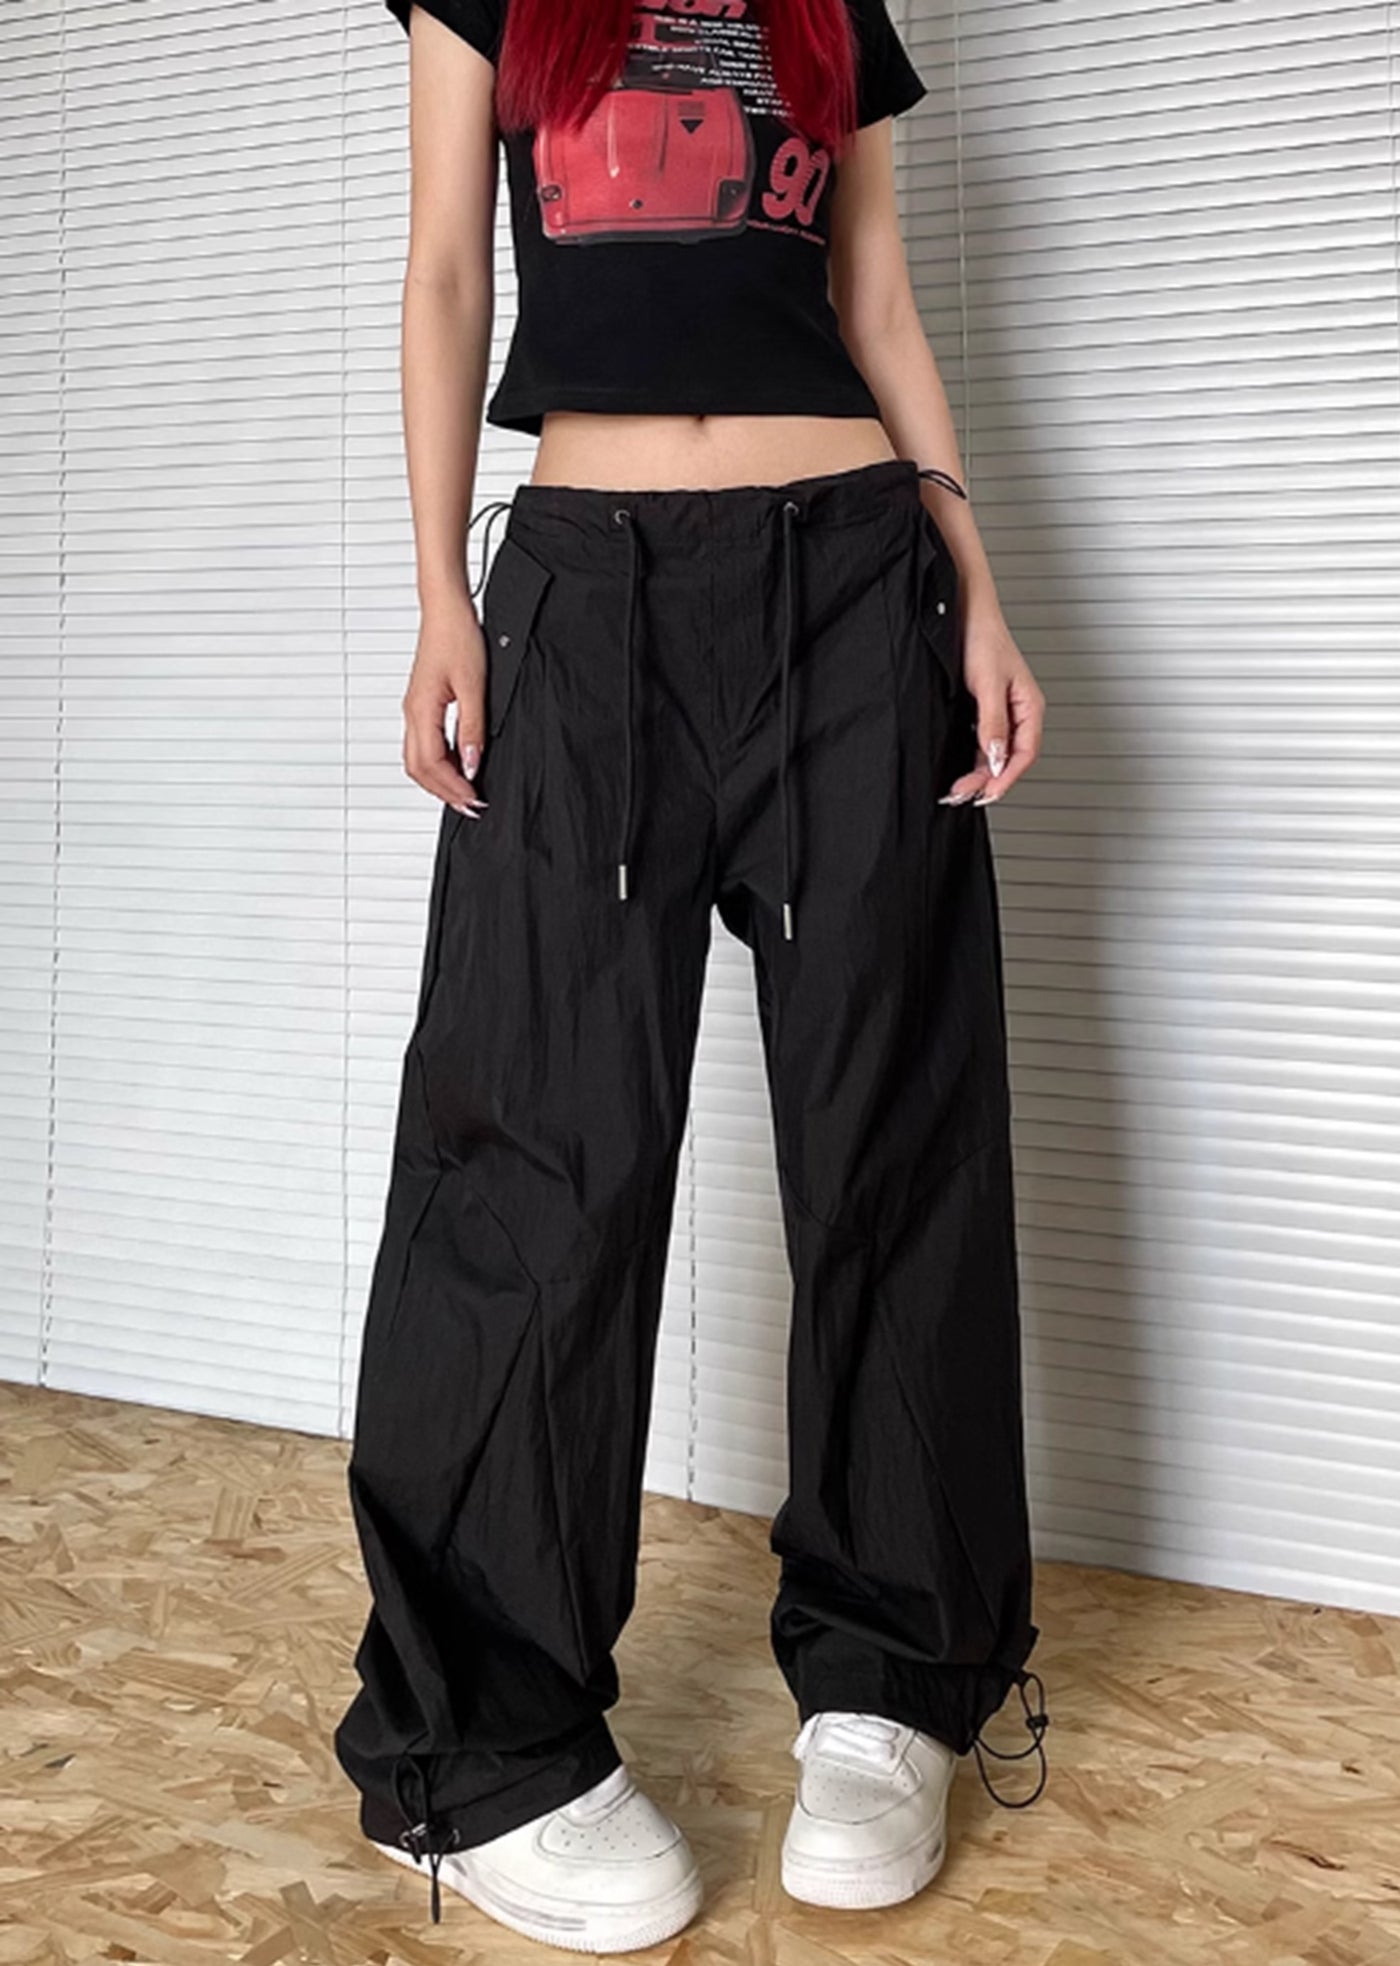 【Apocket】Dull and wrinkled street wide silhouette pants  AK0024